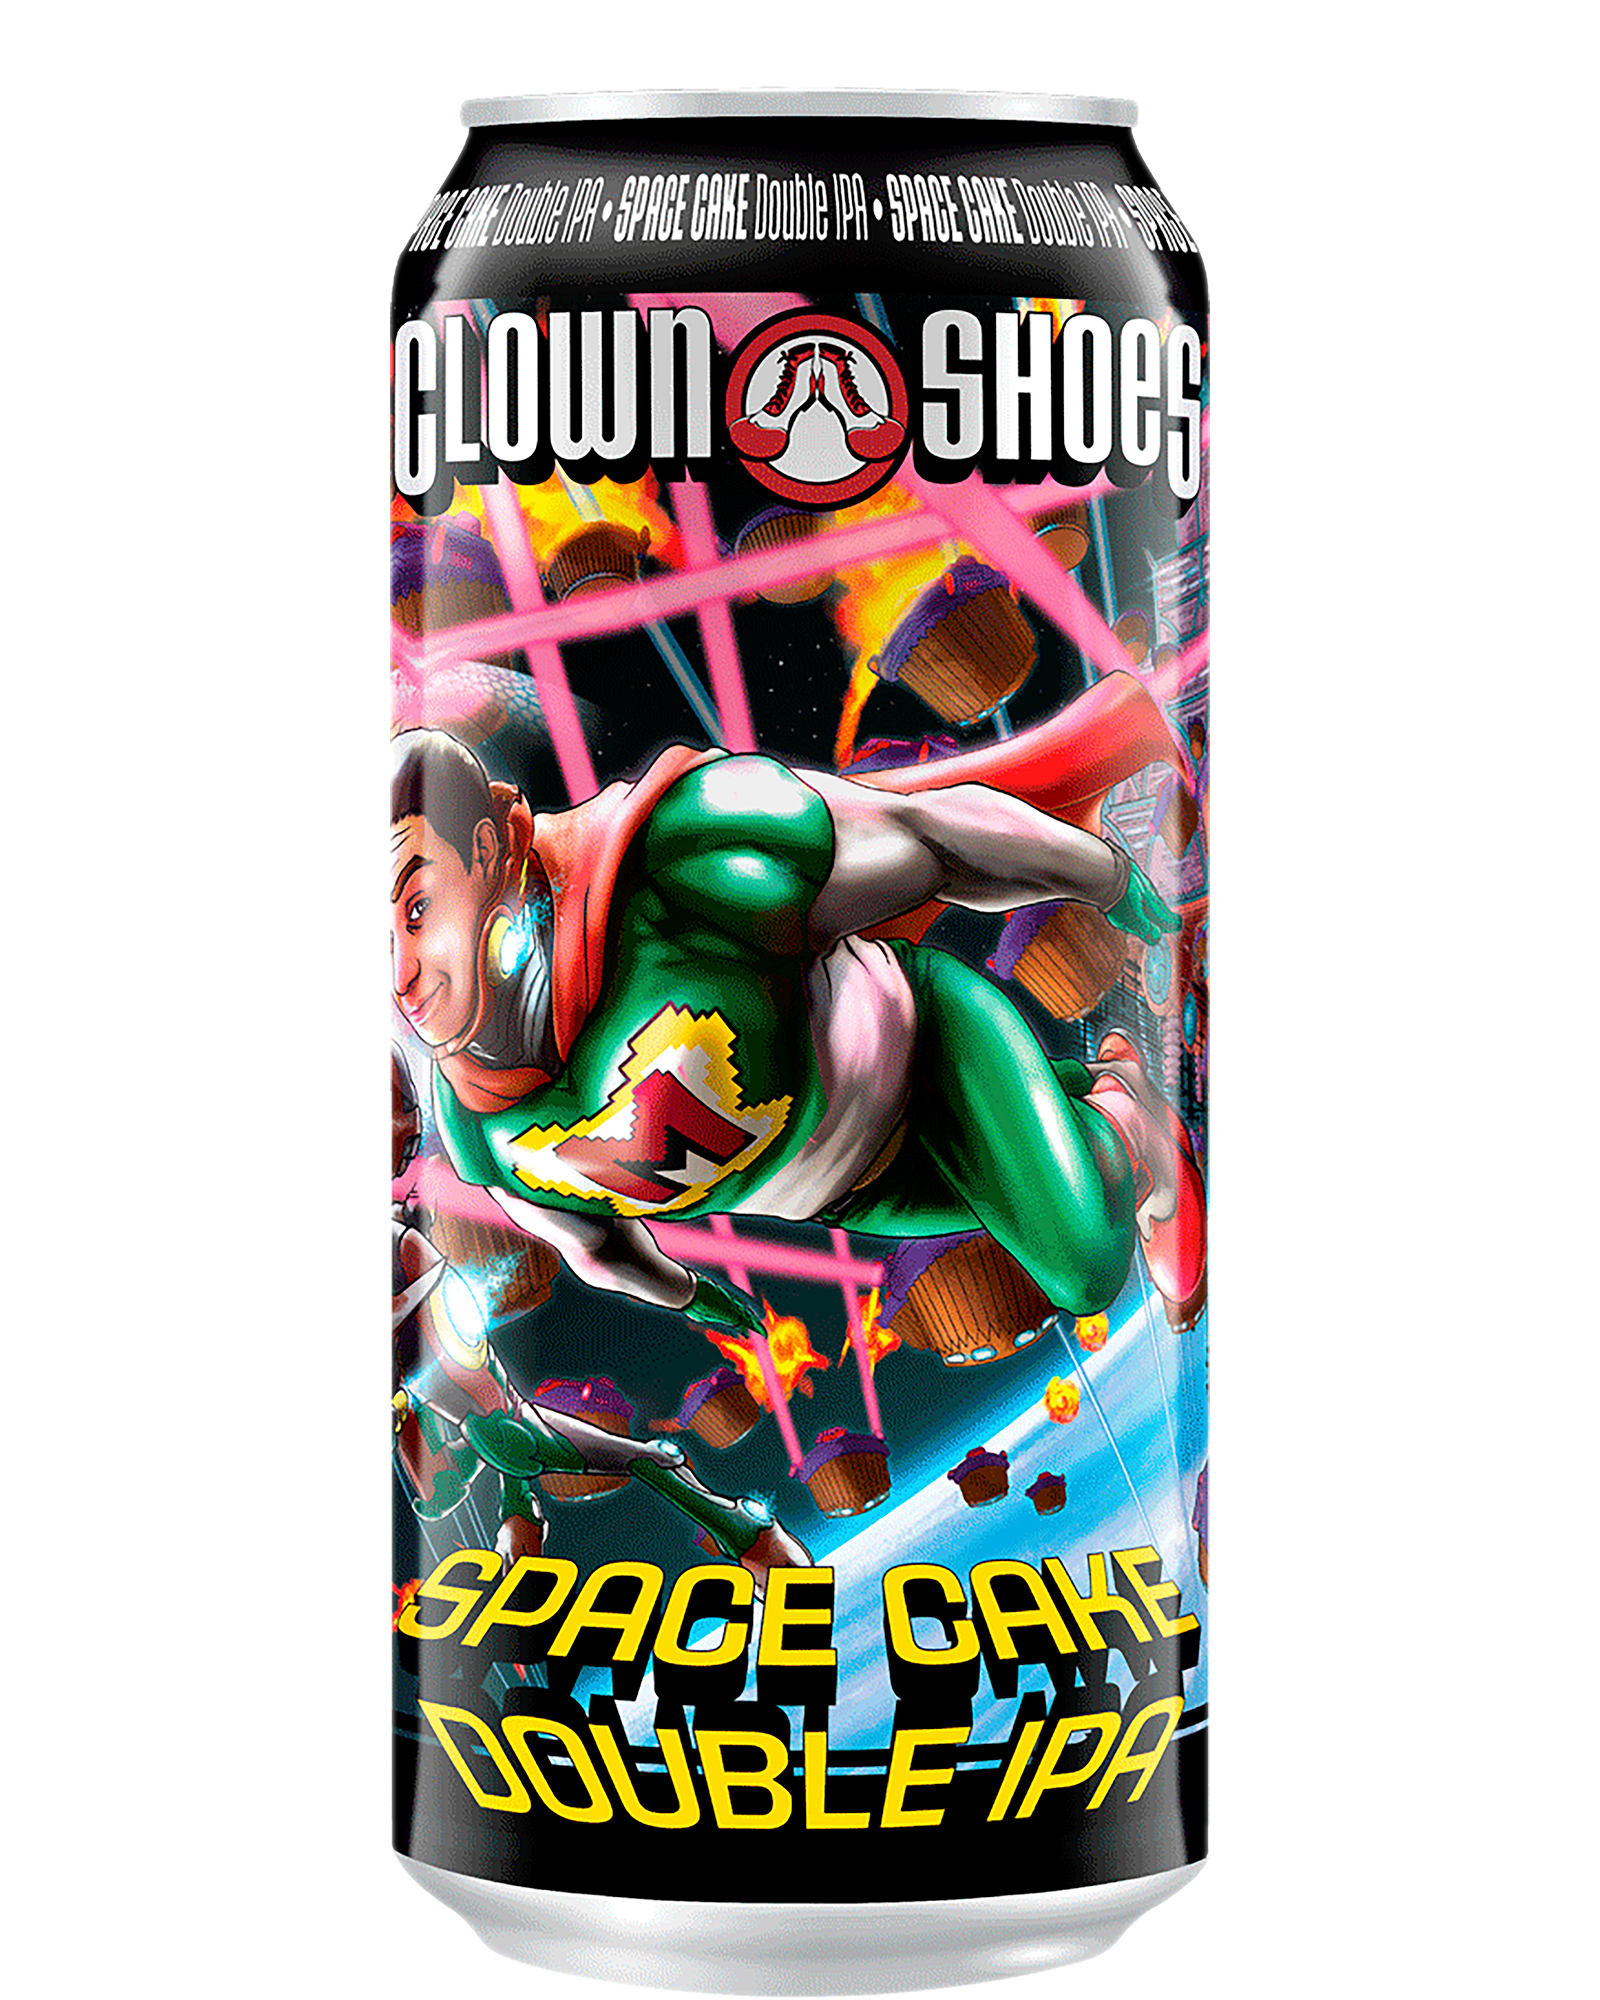 Clown Shoes Space Cake Double IPA can